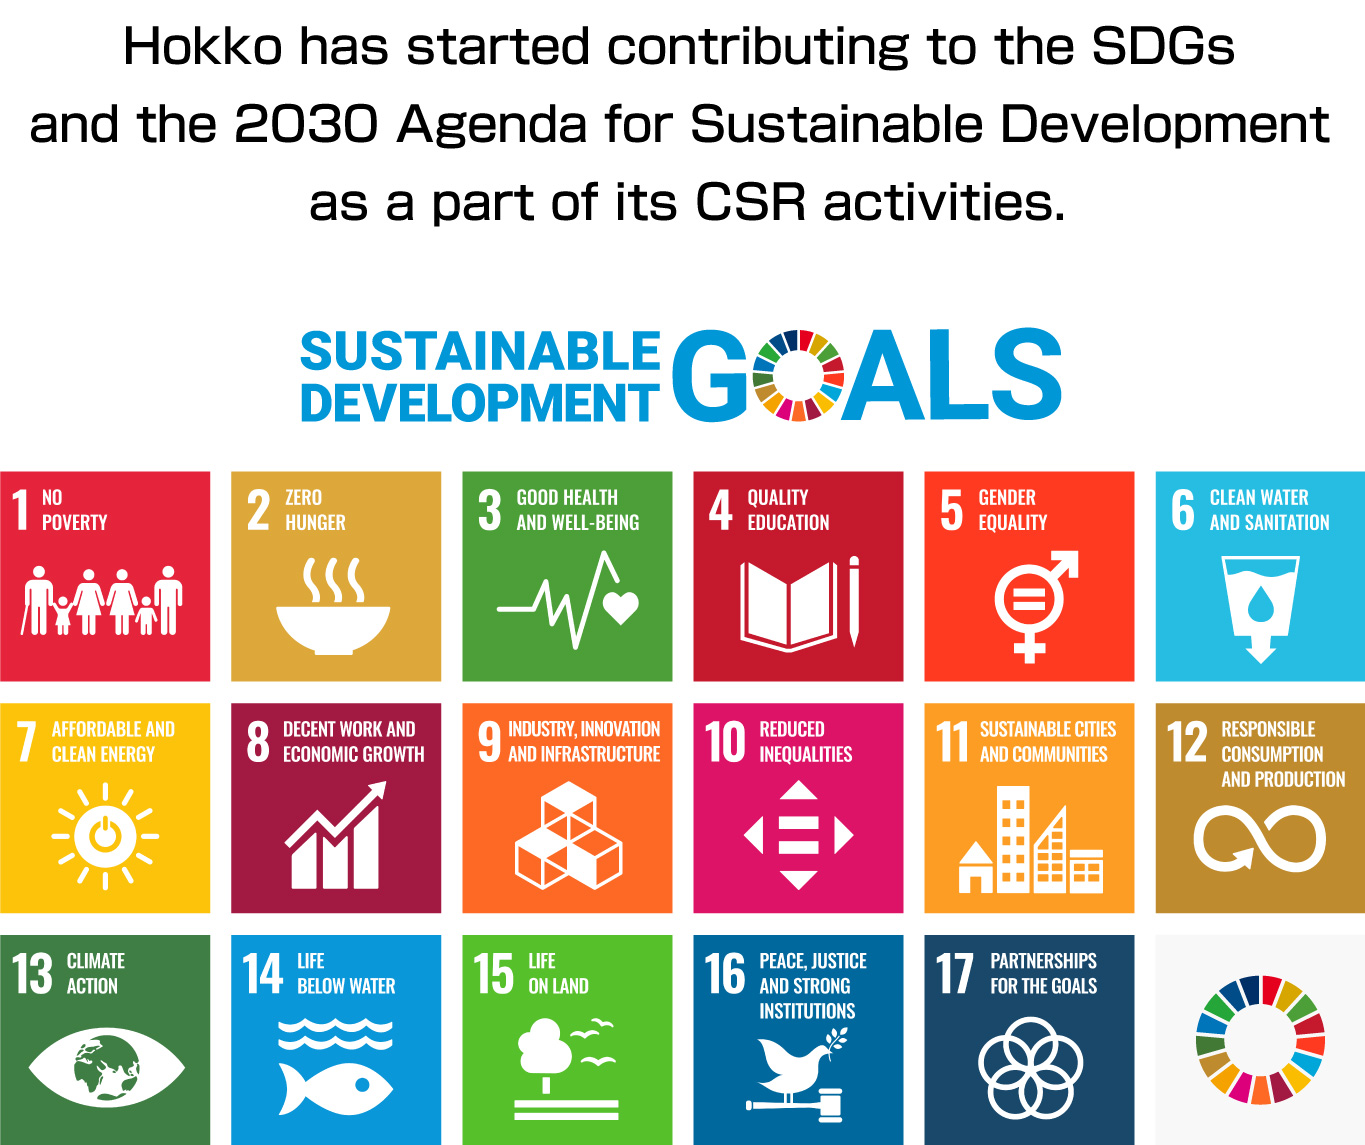 Hokko has started contributing to the SDGs and the 2030 Agenda for Sustainable Development as a part of its CSR activities.